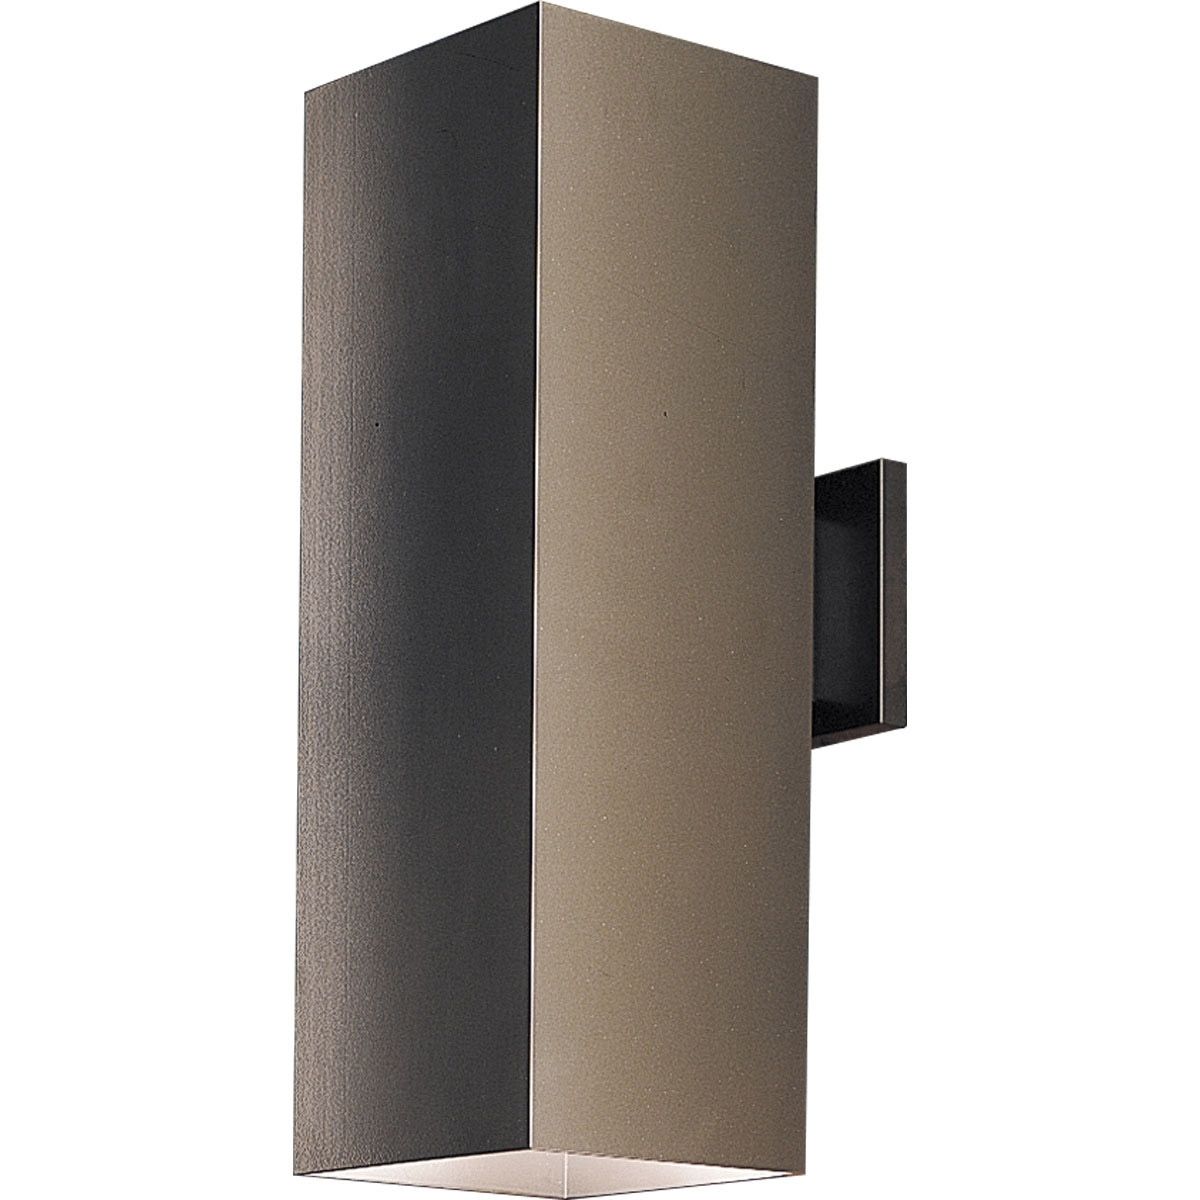 Lighting P5644 20 Square Outdoor Wall Mount Fixture With Widely Used Outdoor Wall Mounted Lighting (View 10 of 20)